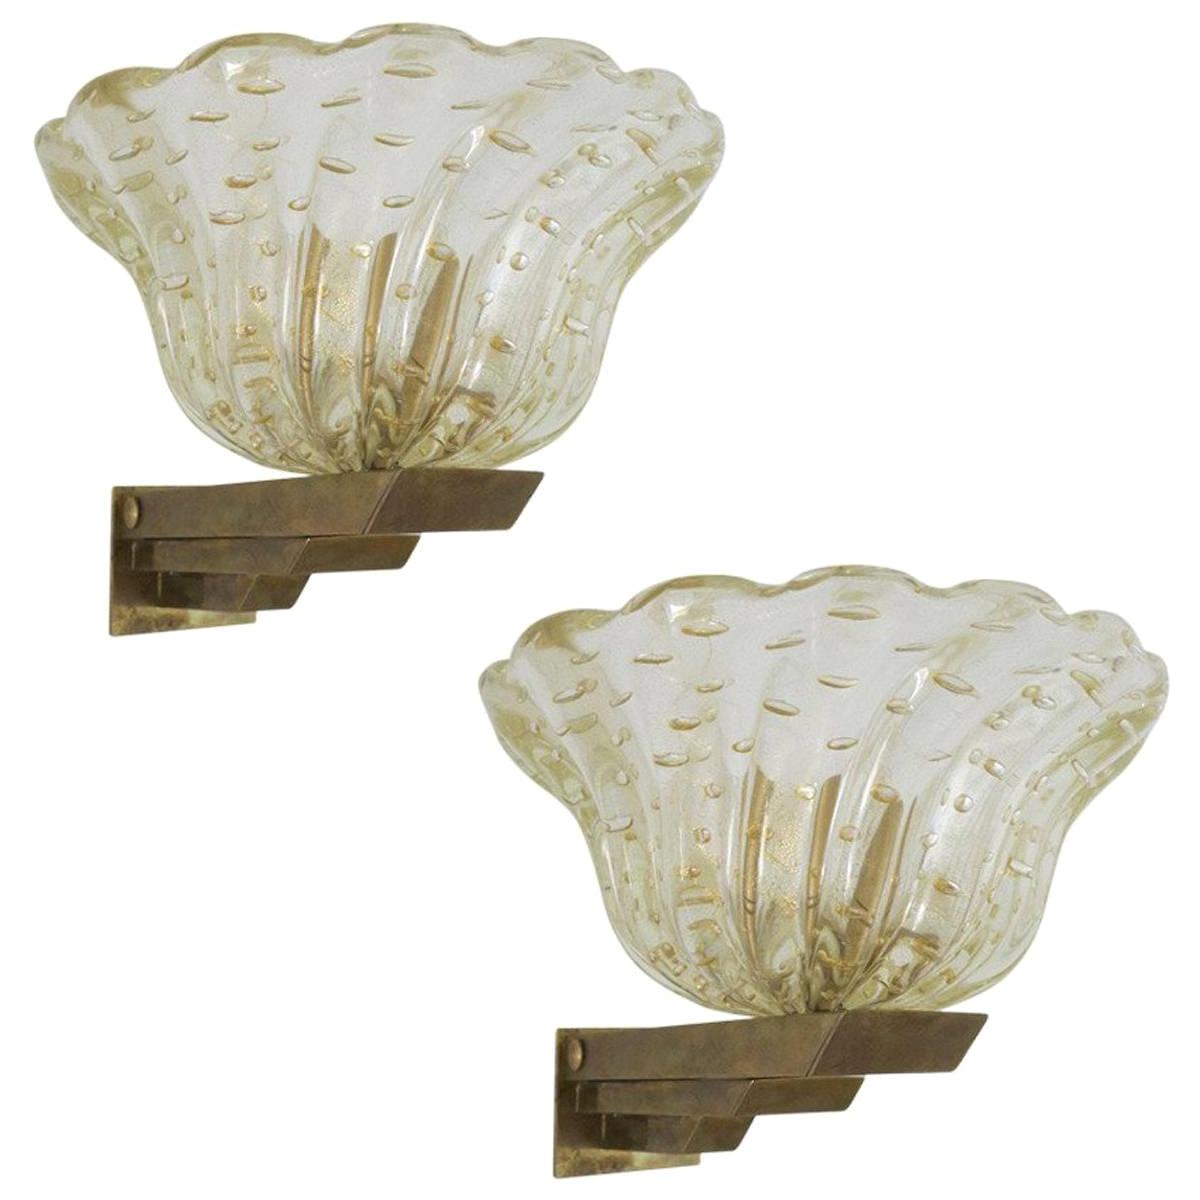 Pair of Italian Sconces w/ Murano Glass Designed by Barovier e Toso, 1930s